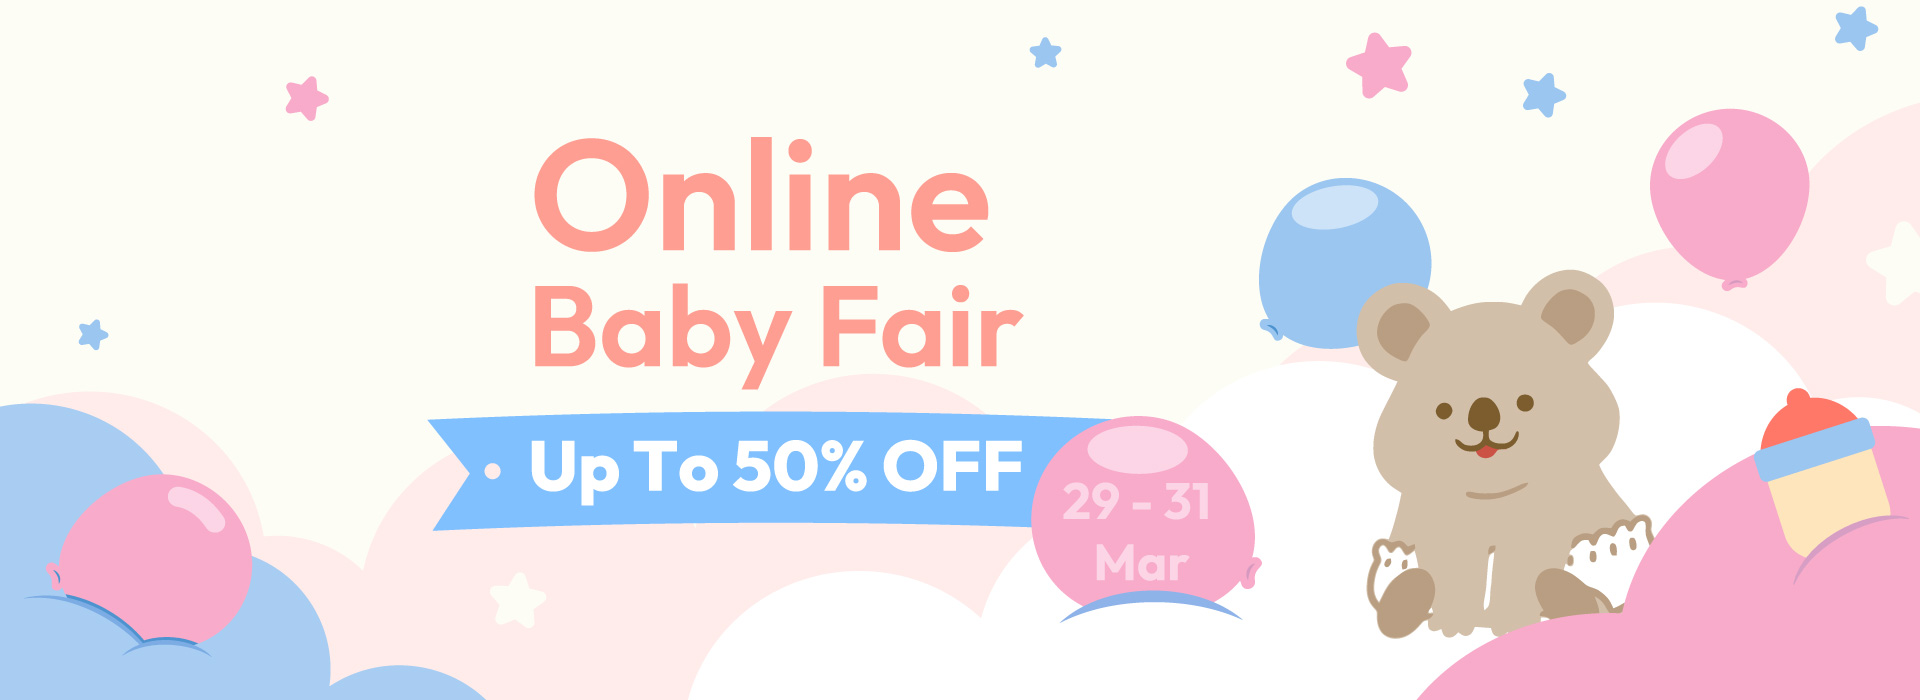 Online Baby Fair Up To 50% OFF